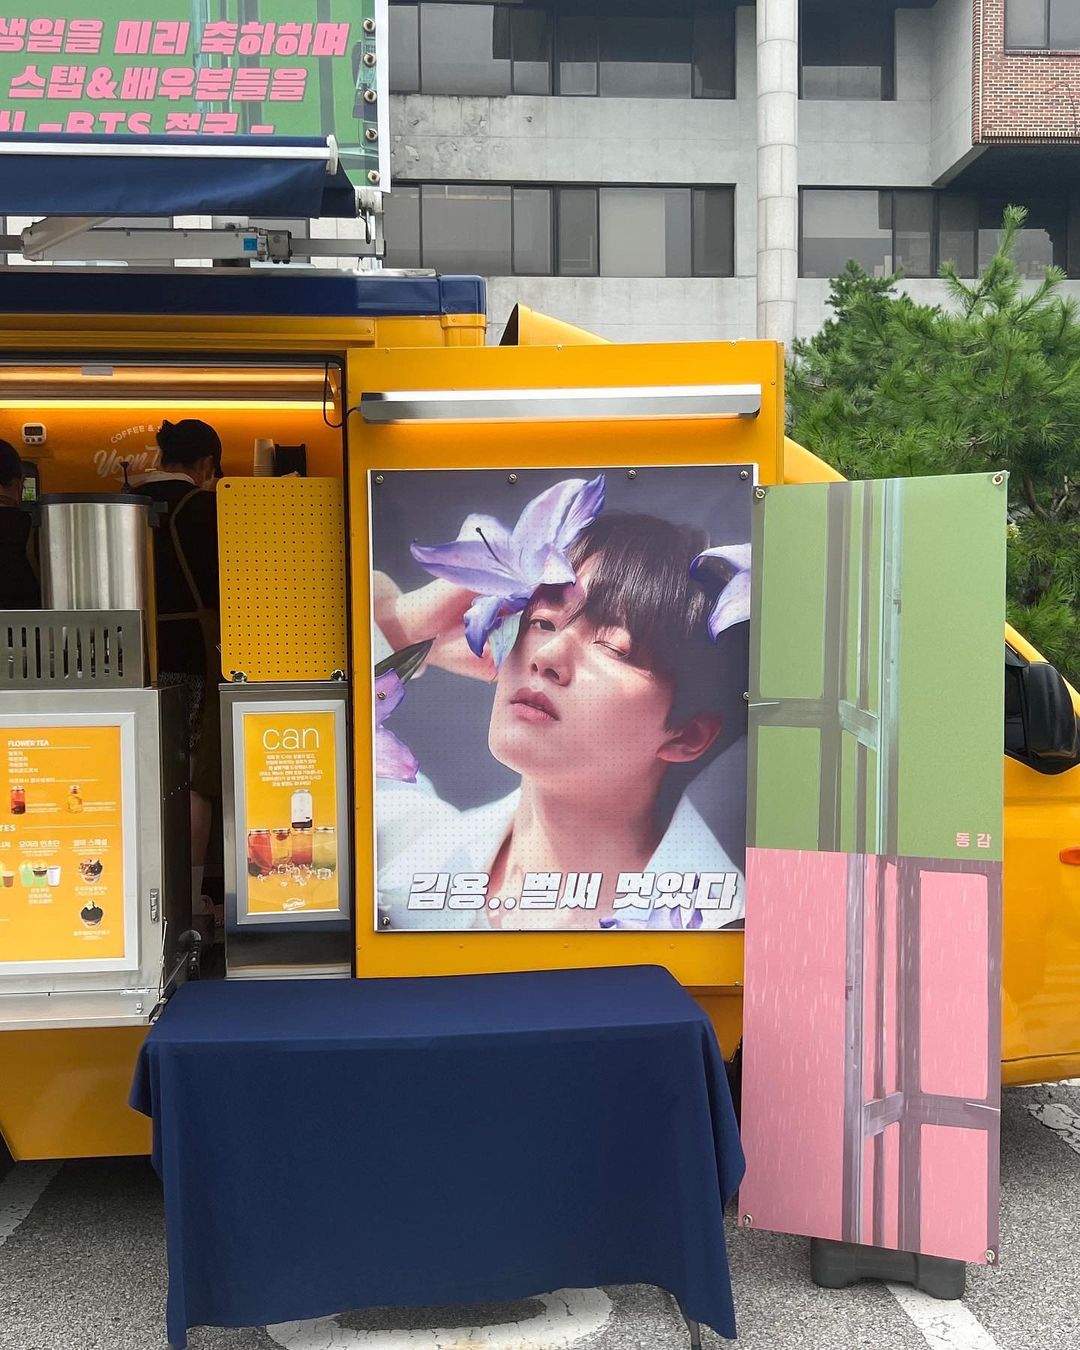 Yeo Jin Goo receives a coffee truck by his friend Jungkook of BTS?